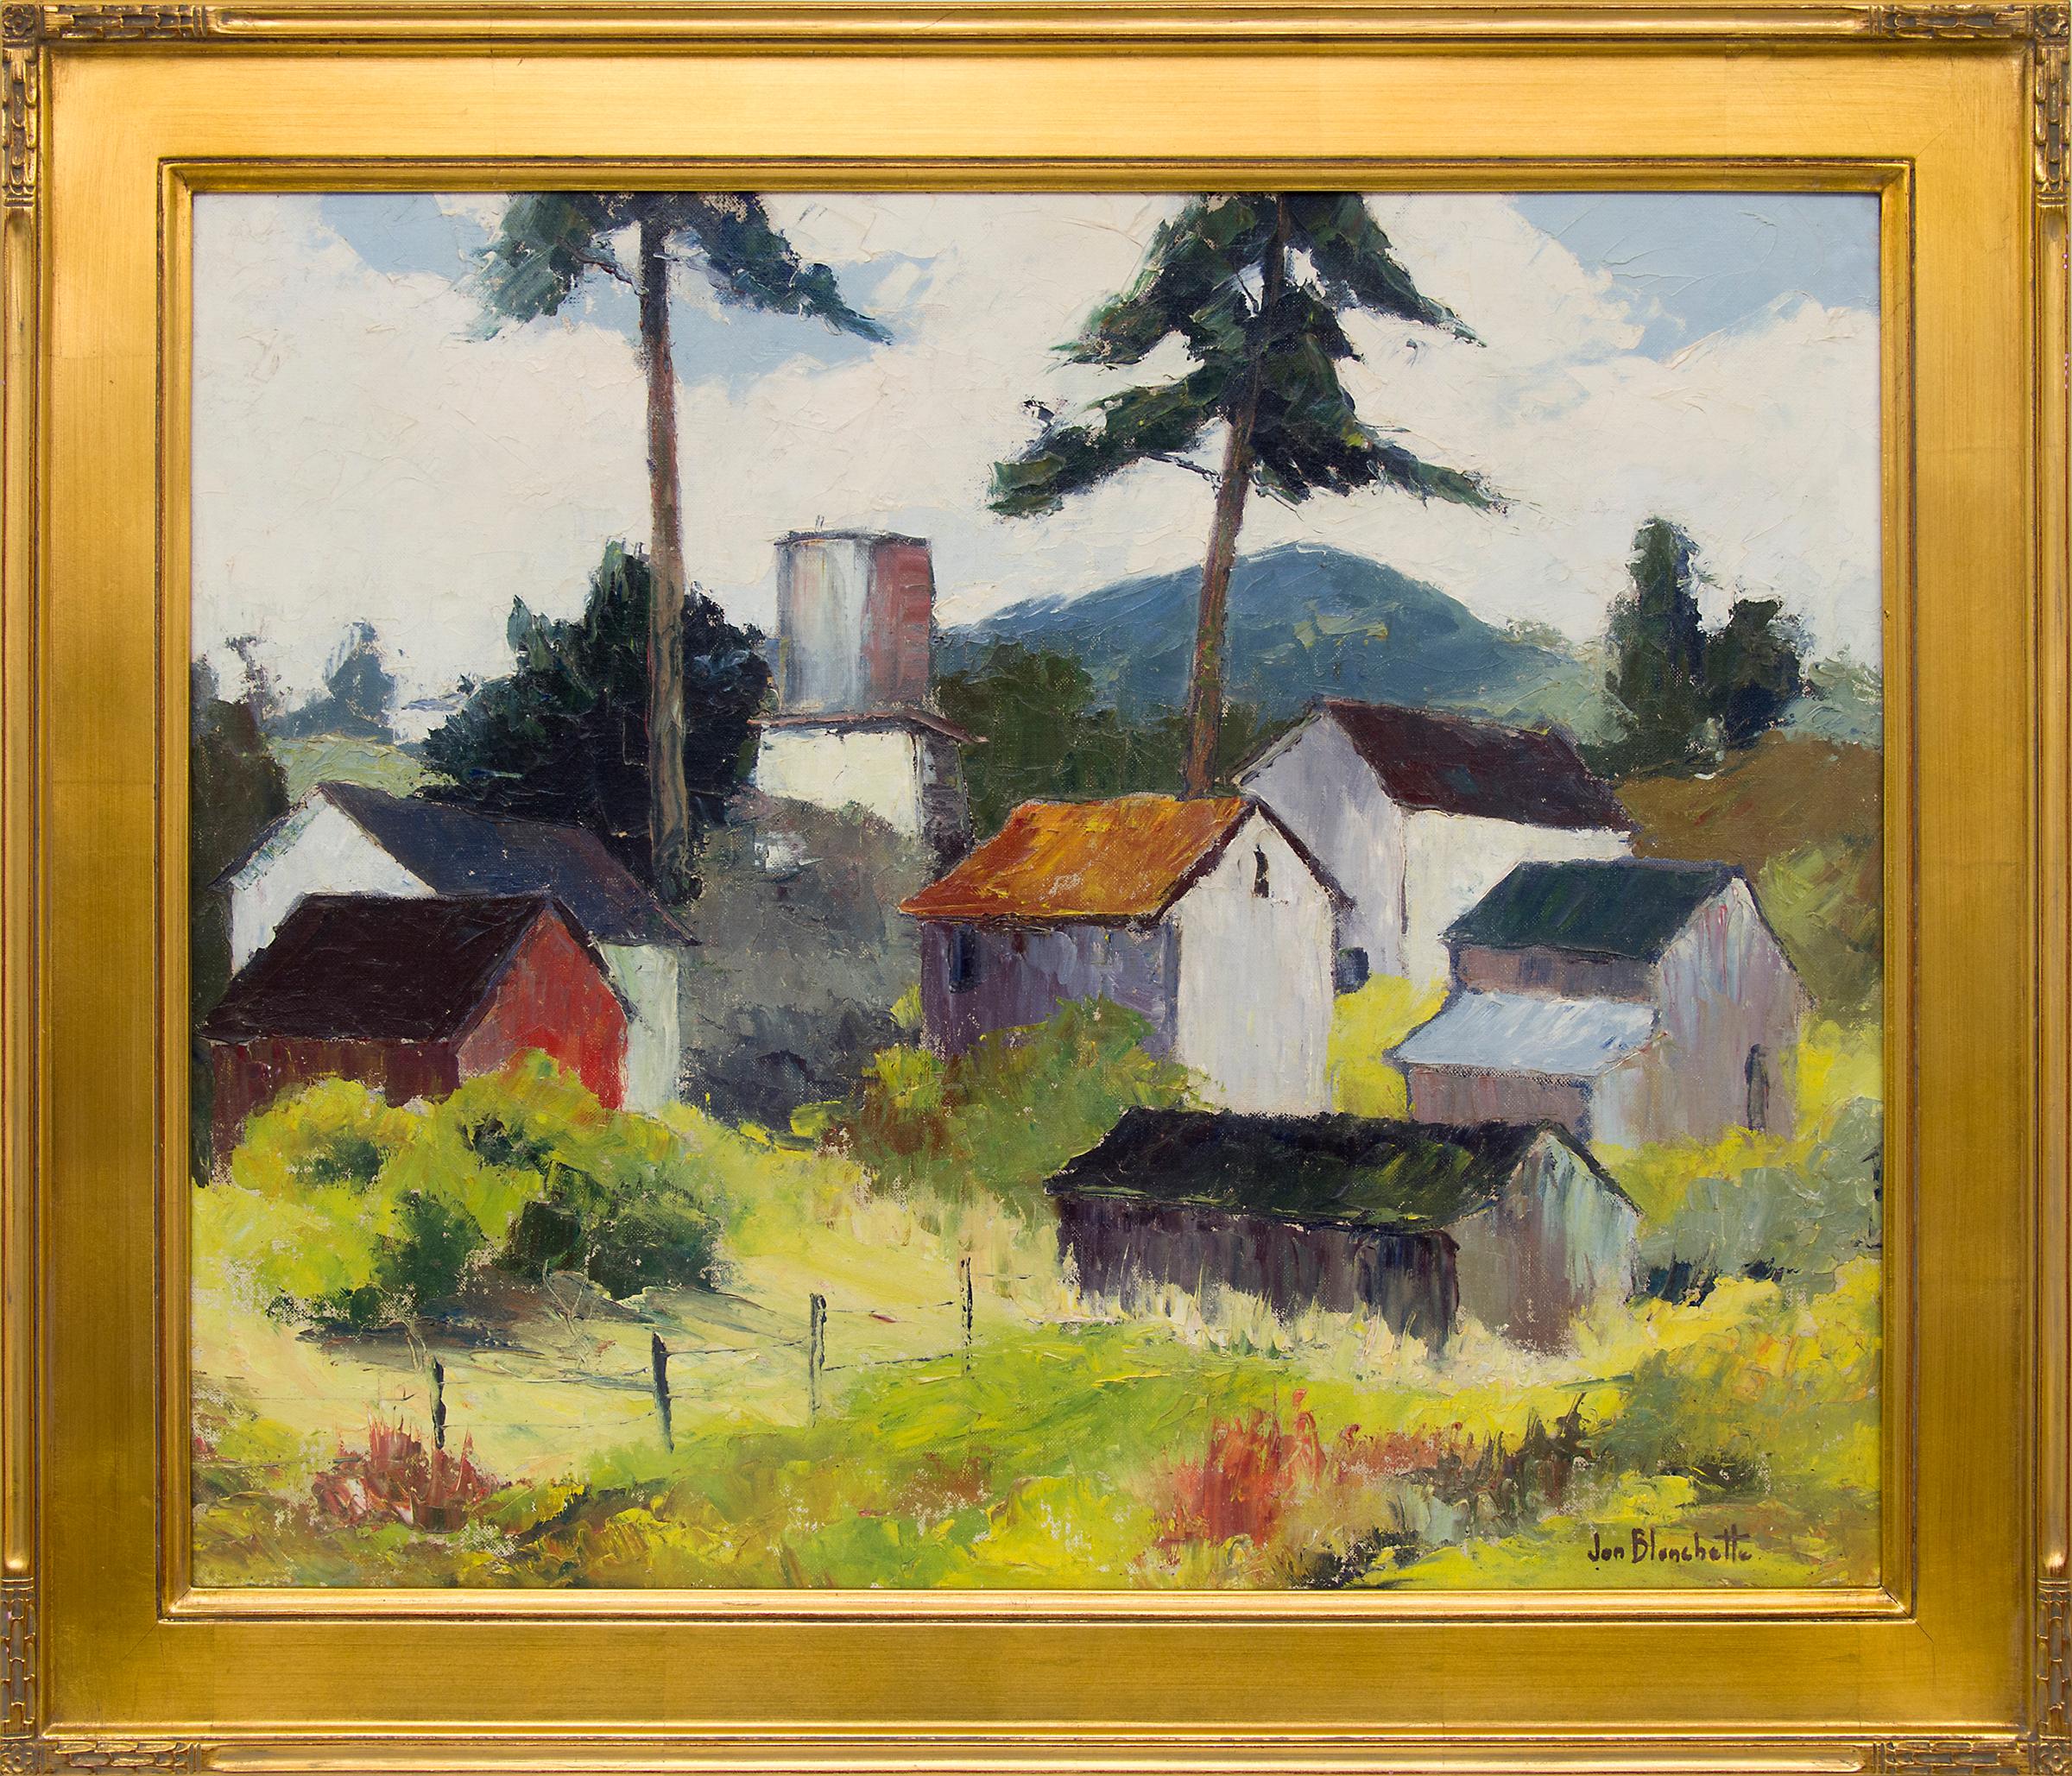 Jon Blanchette Landscape Painting - Old Aptos (Northern California), Vintage 1950s Painting, Green, Yellow, White